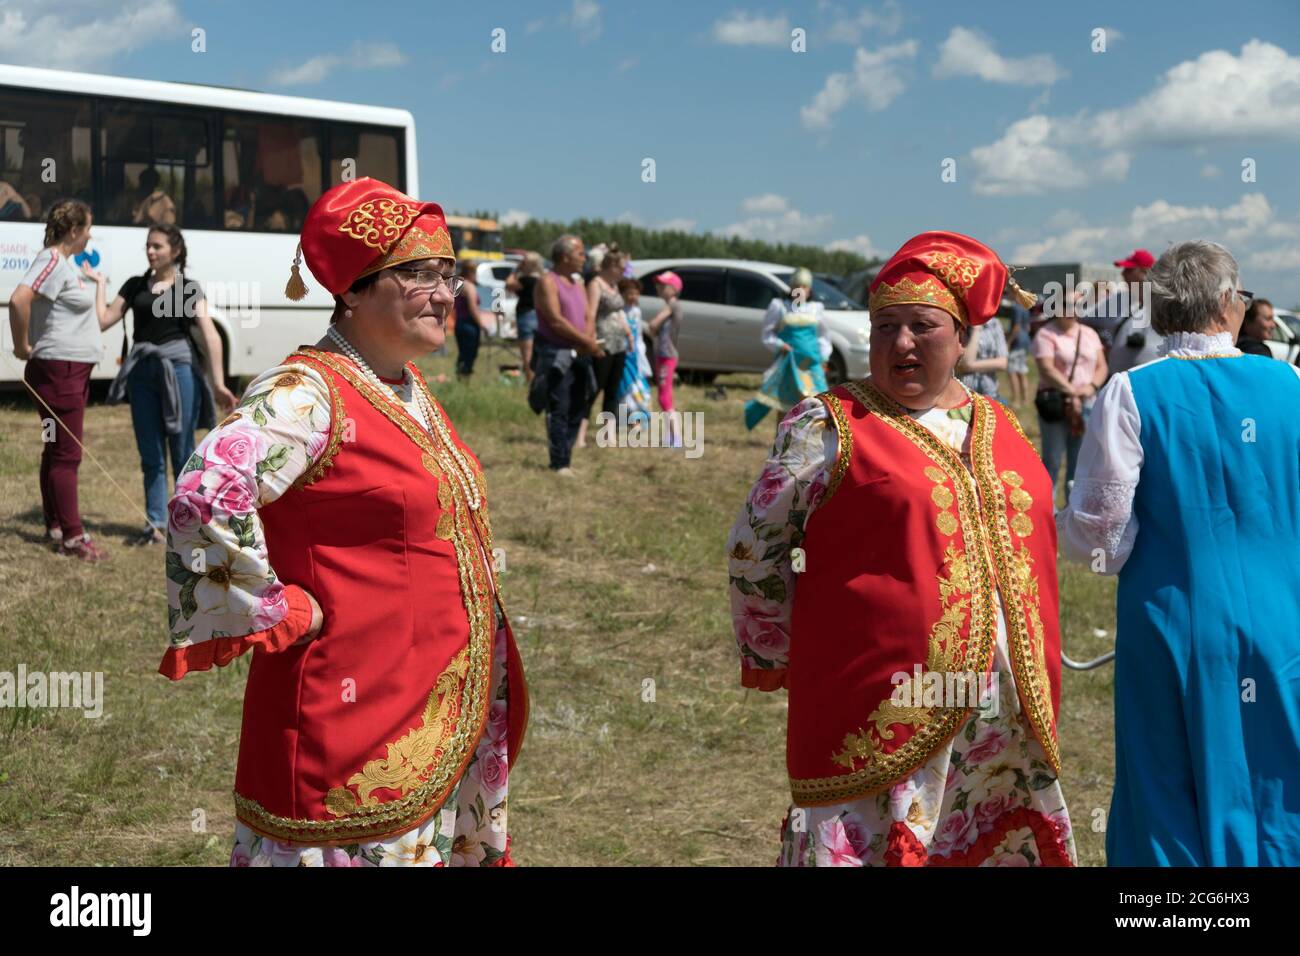 Two women in national Tatar folk costume  stands among people during the ethnic festival Karatag on the shore of a Large lake. Stock Photo